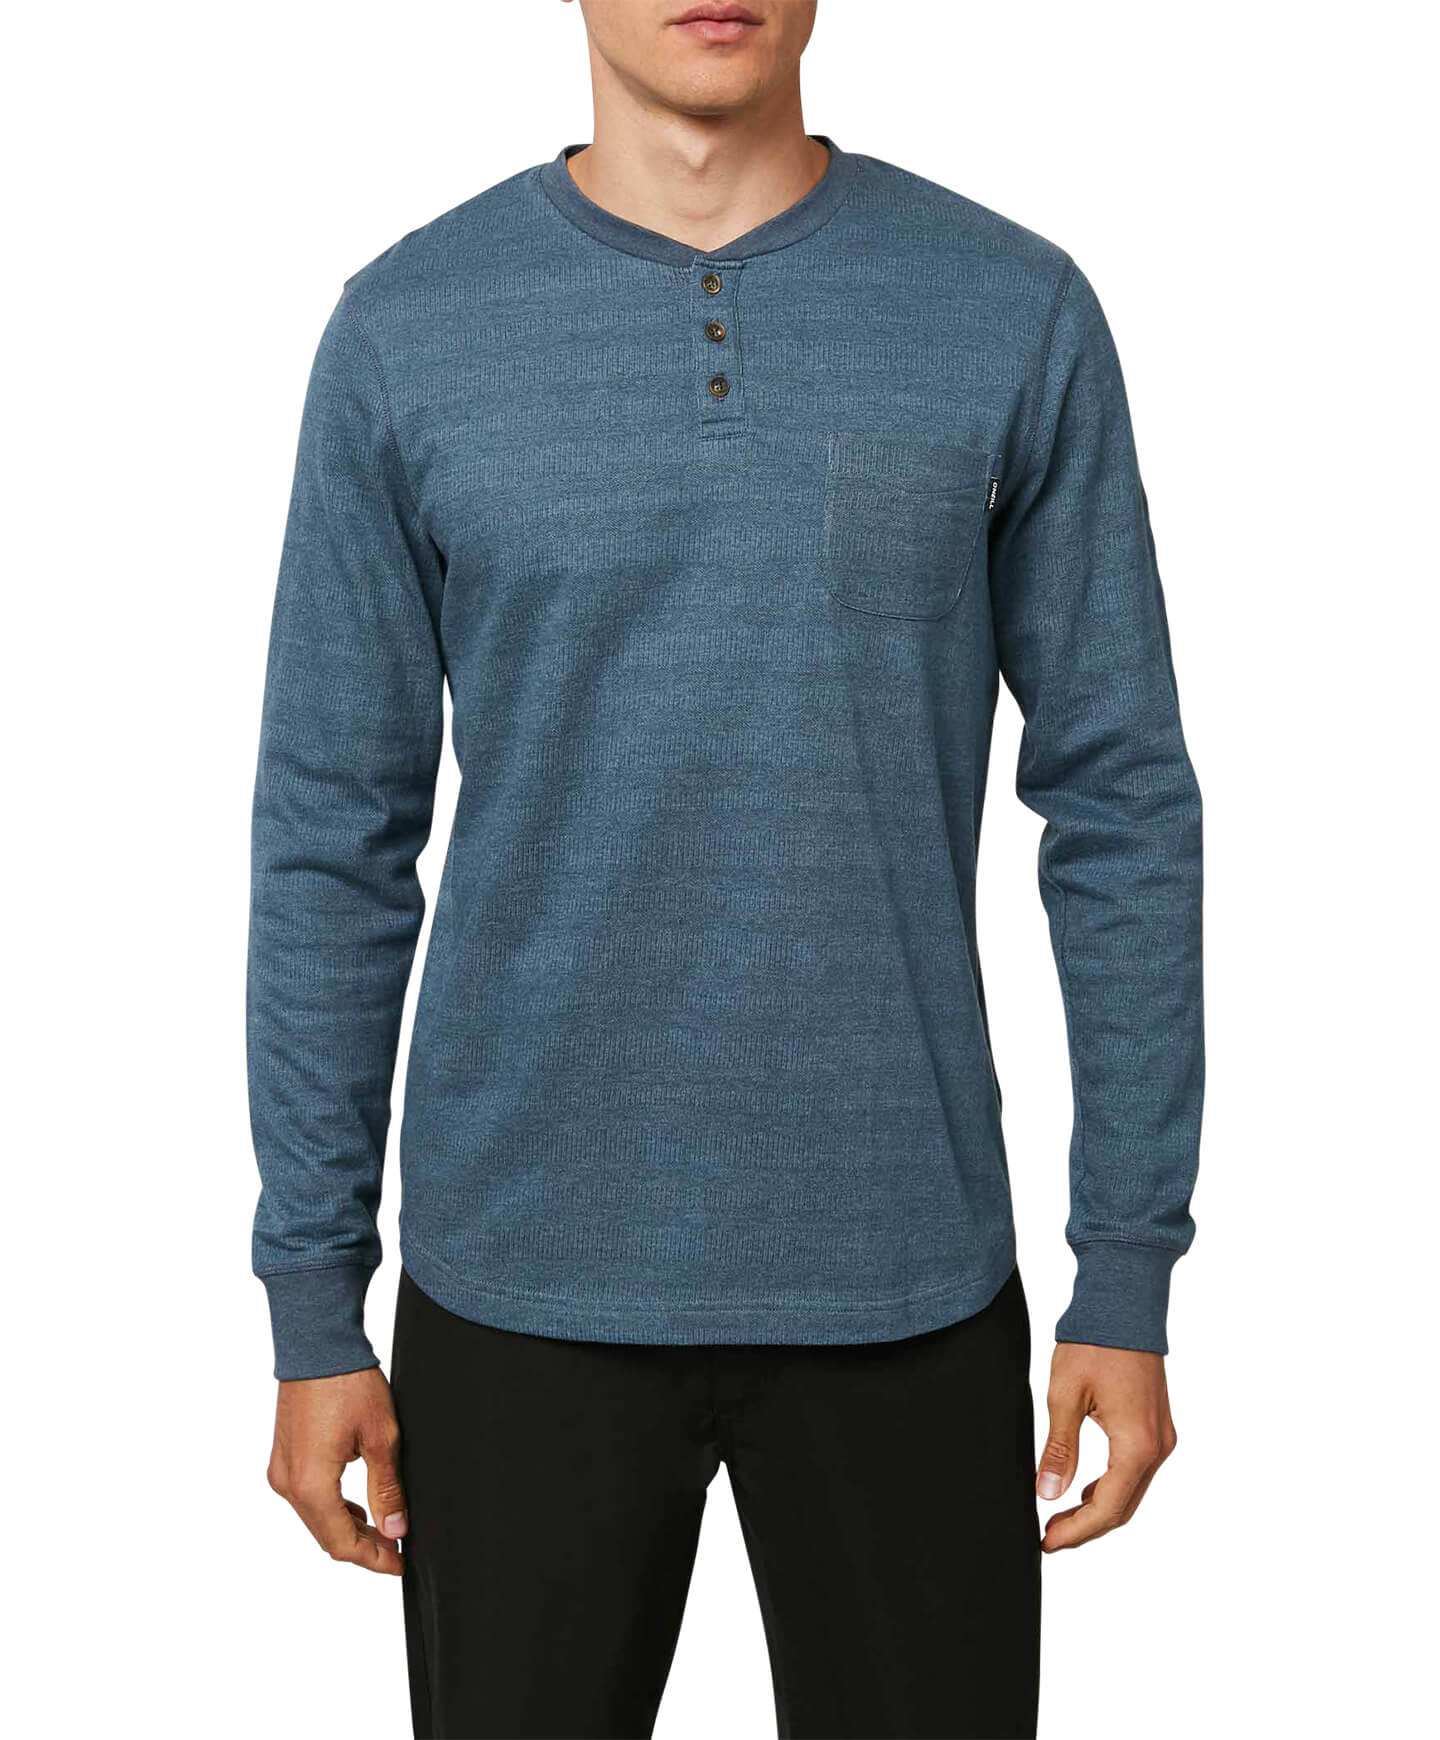 Clearview Henley Top - Cadet Blue